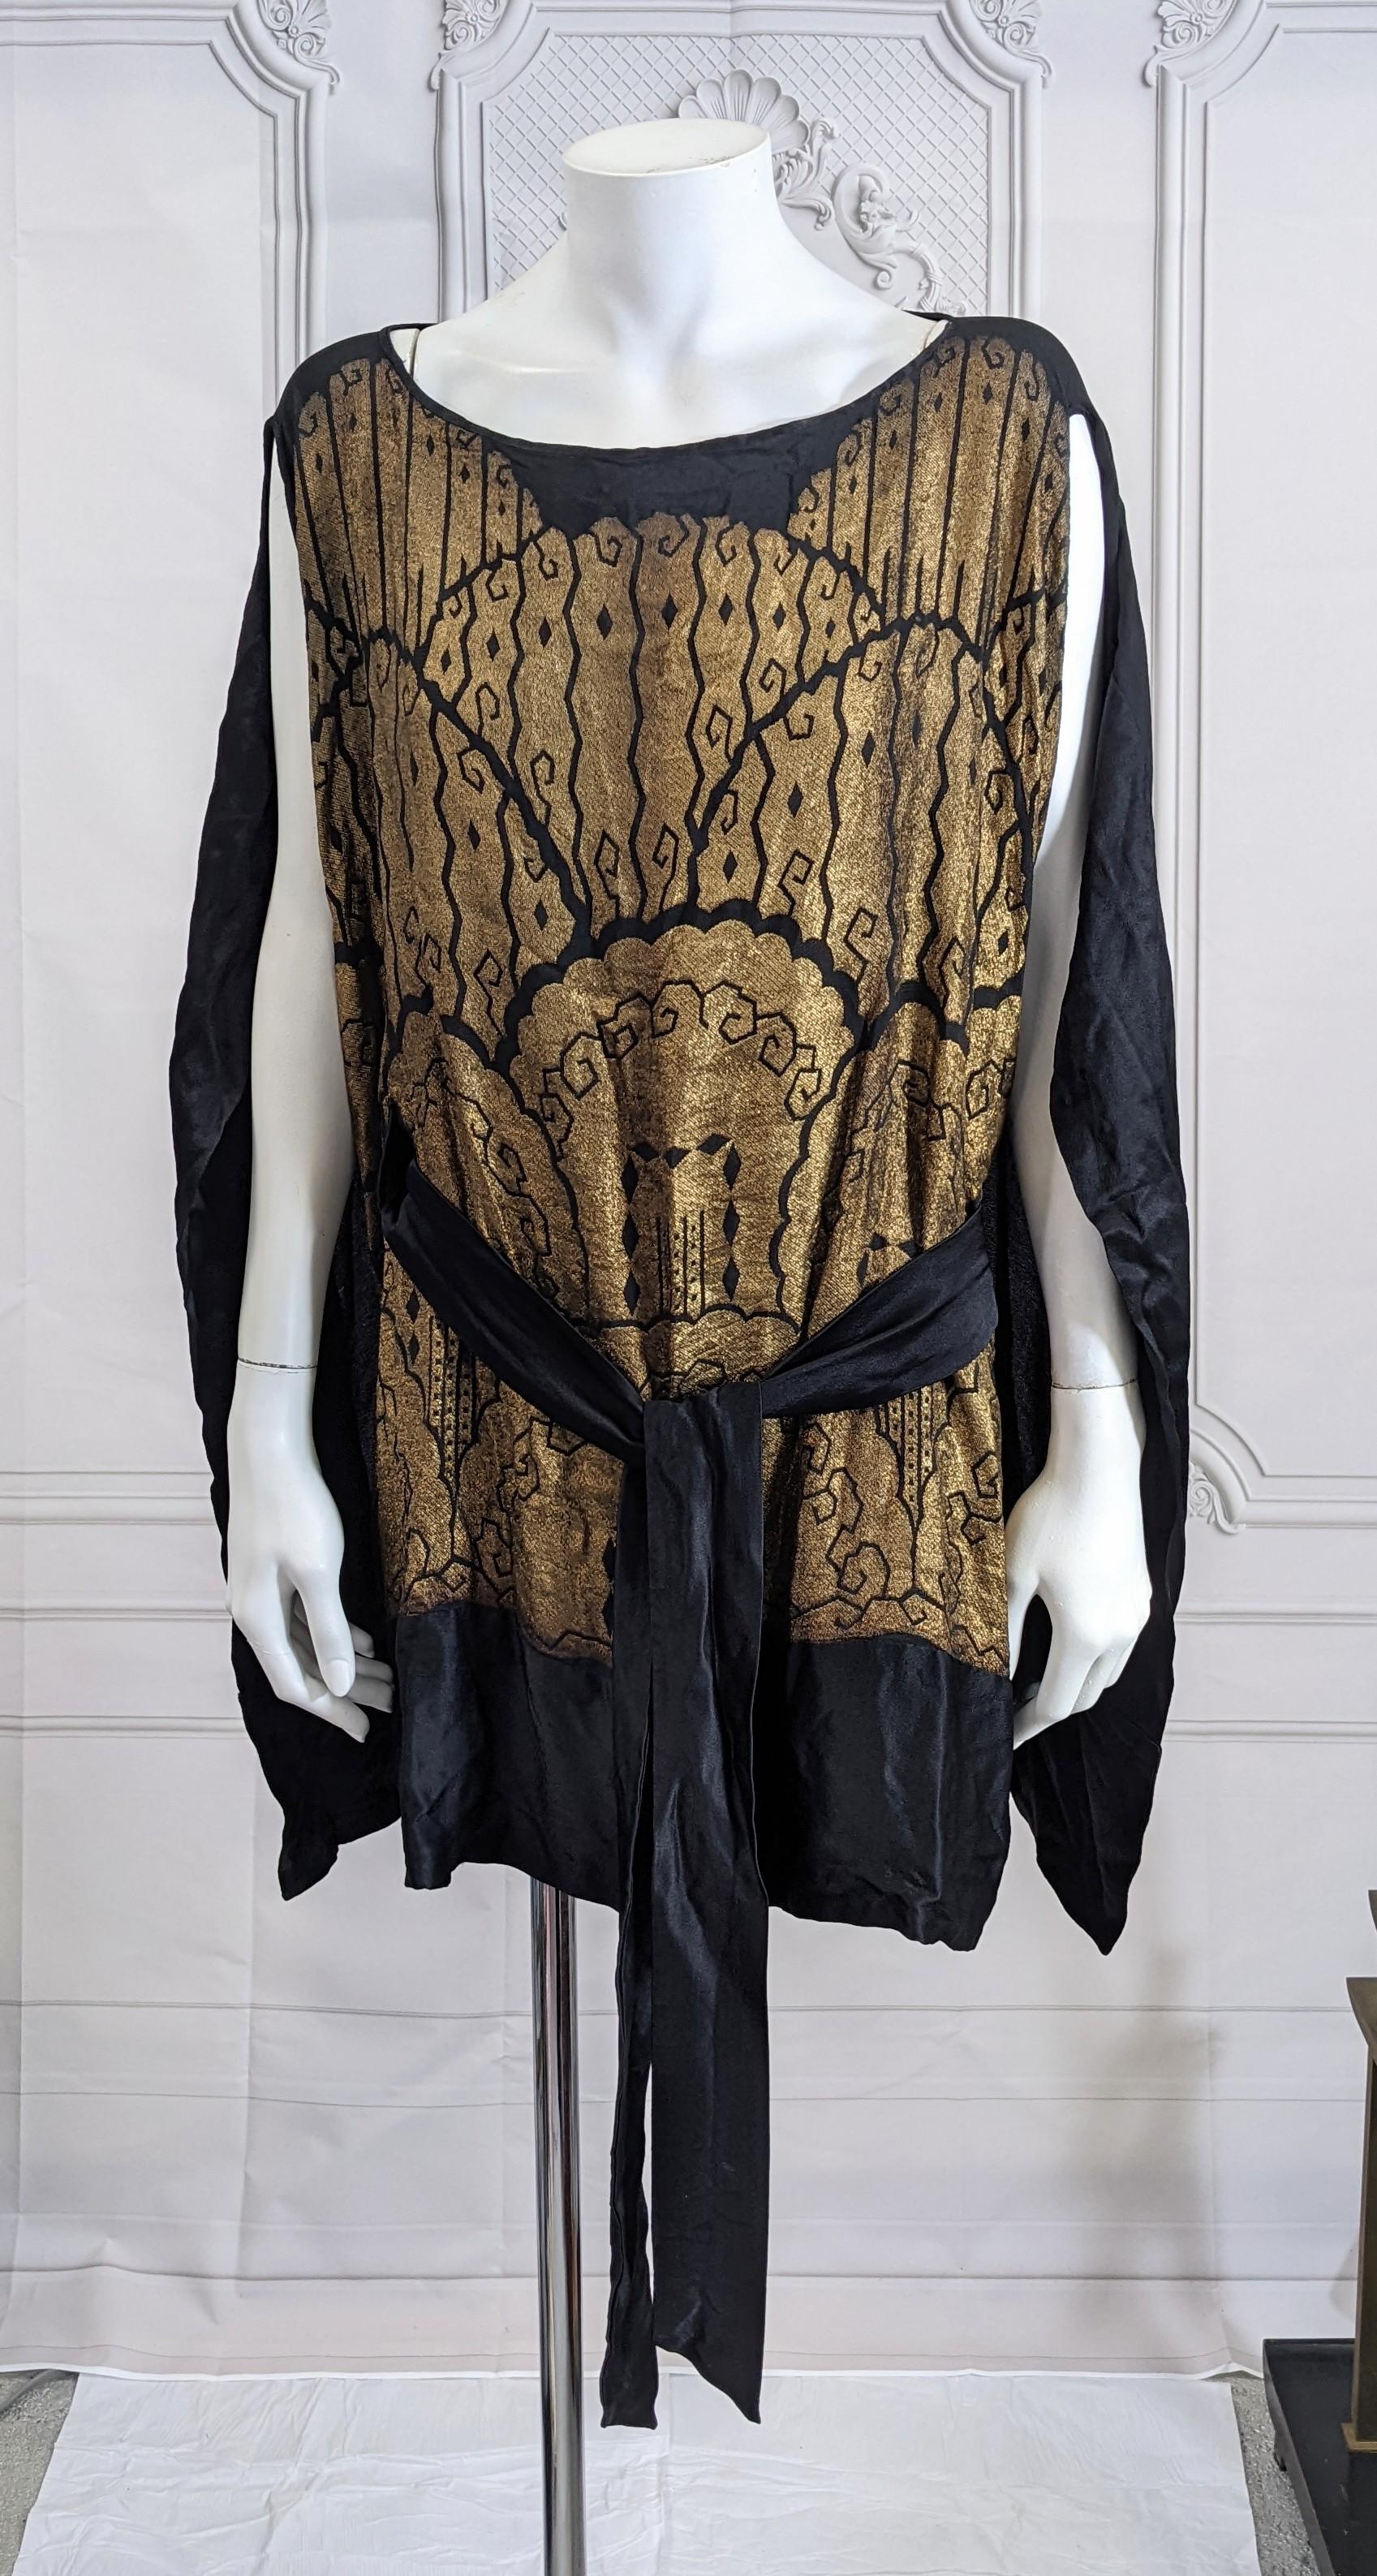 Elegant Art Deco Silk Lame Tunic constructed from the period lame scarf. Genuine gold metallic thread in Art Deco patterning on silk with stain banding. Tunic was created in the period with a hidden back panel, and added ties to secure waist.